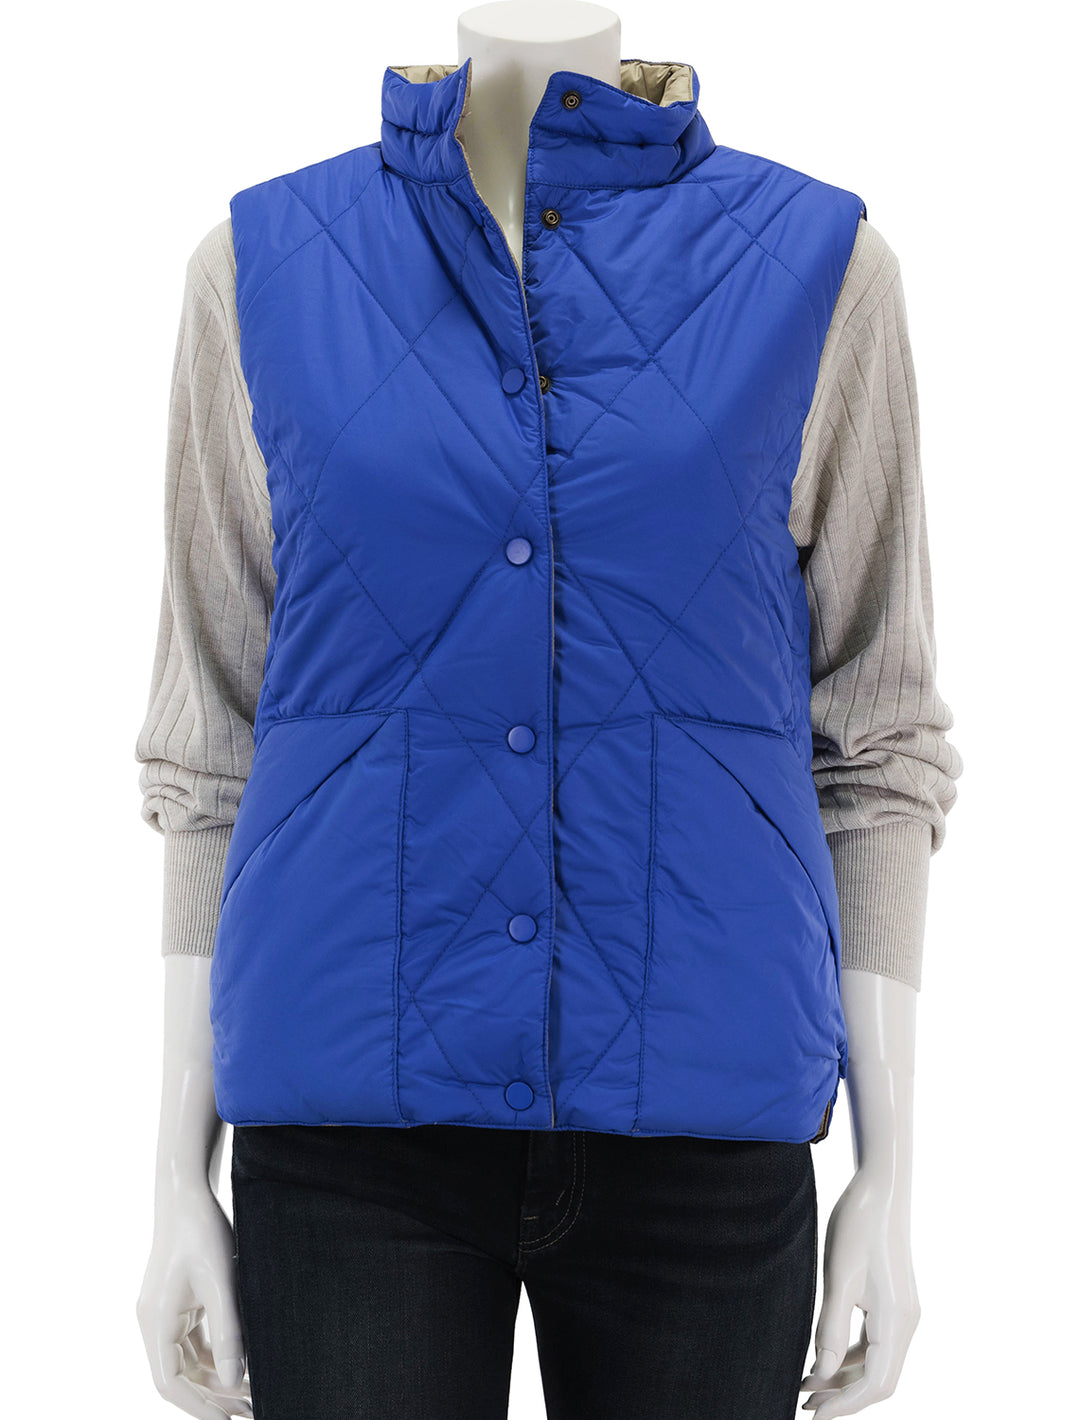 vest sapphire snap front – reversible Twigs in